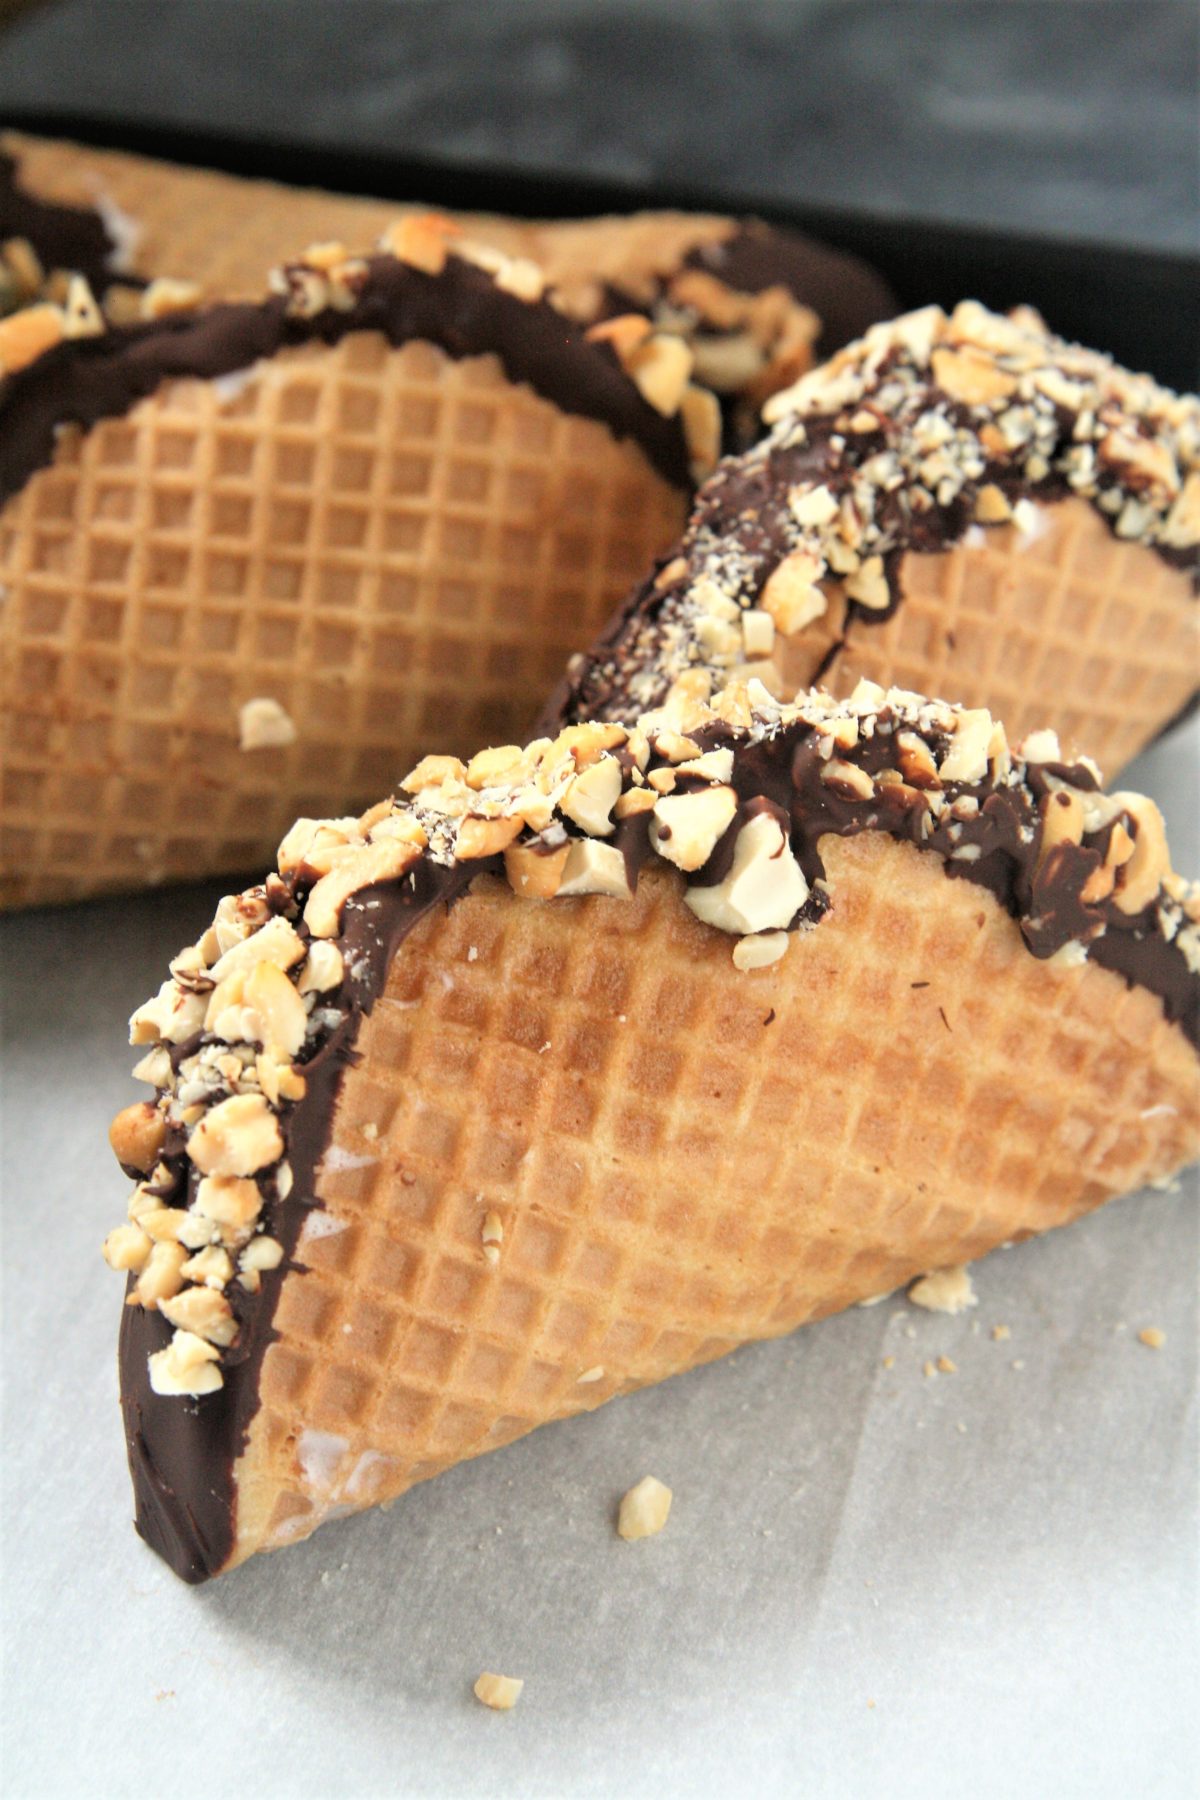 This homemade Choco Taco with taco-shaped waffle cone is filled with vanilla ice cream and topped with chocolate shell and peanuts, just like the iconic treat - the best part is it only requires 4 ingredients!